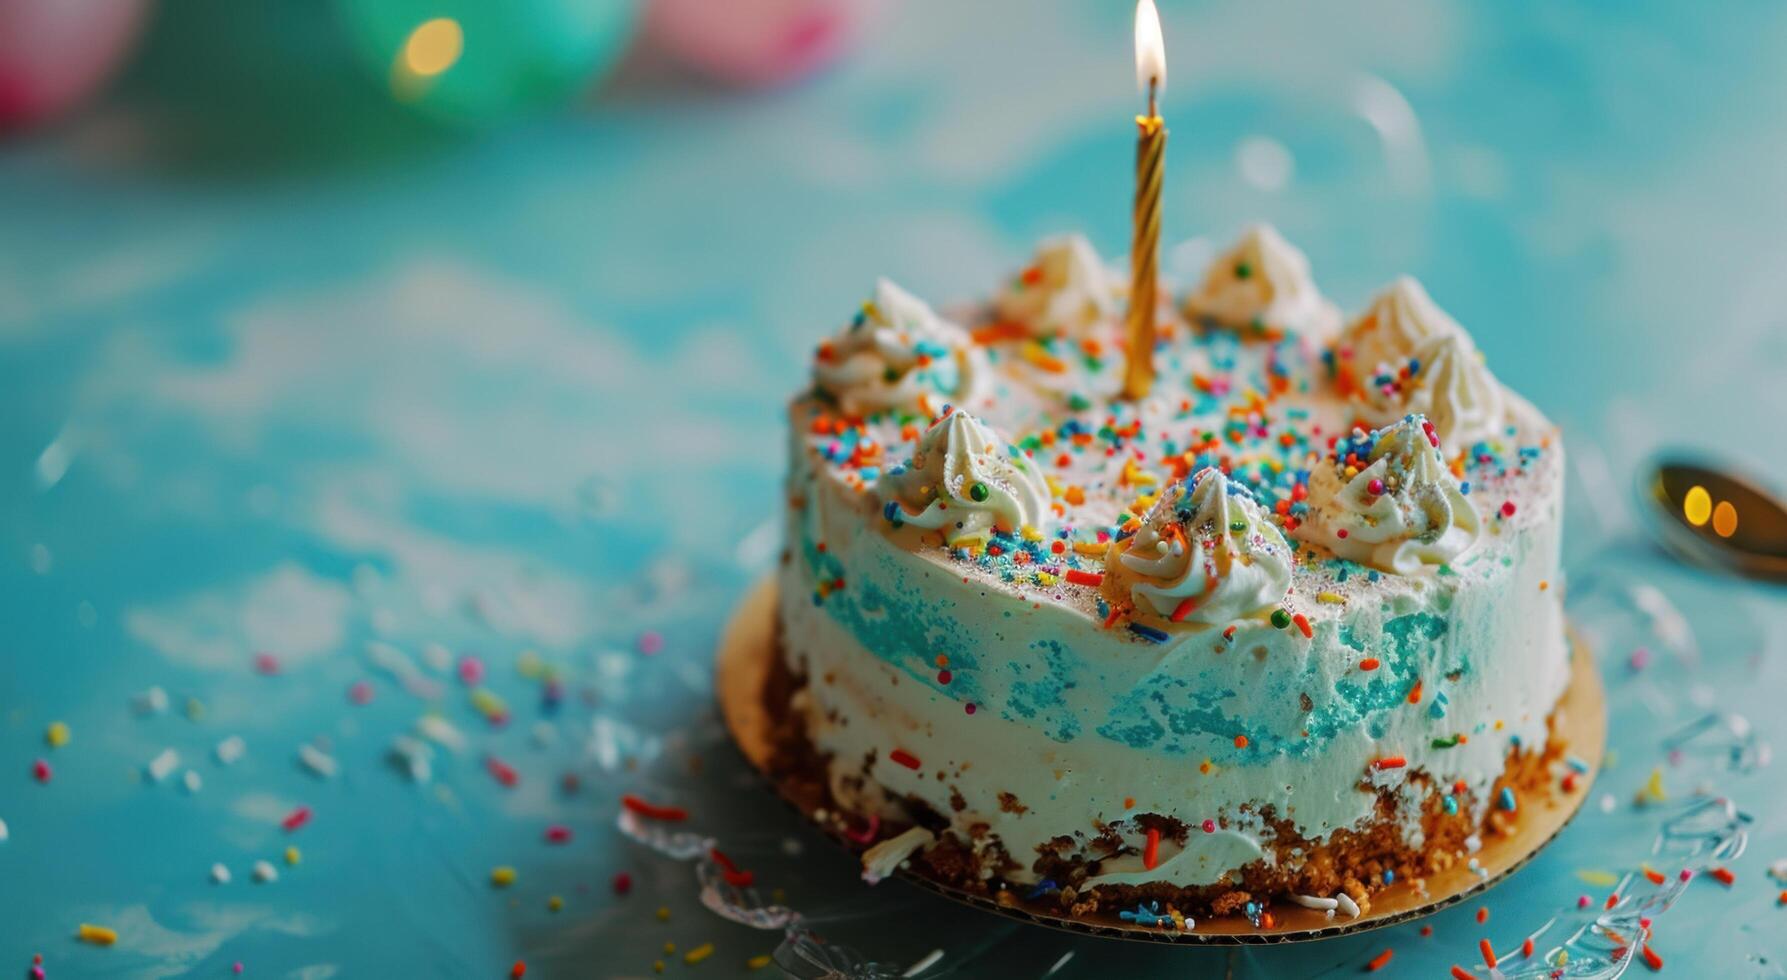 AI generated an empty birthday cake on some blue and white photo